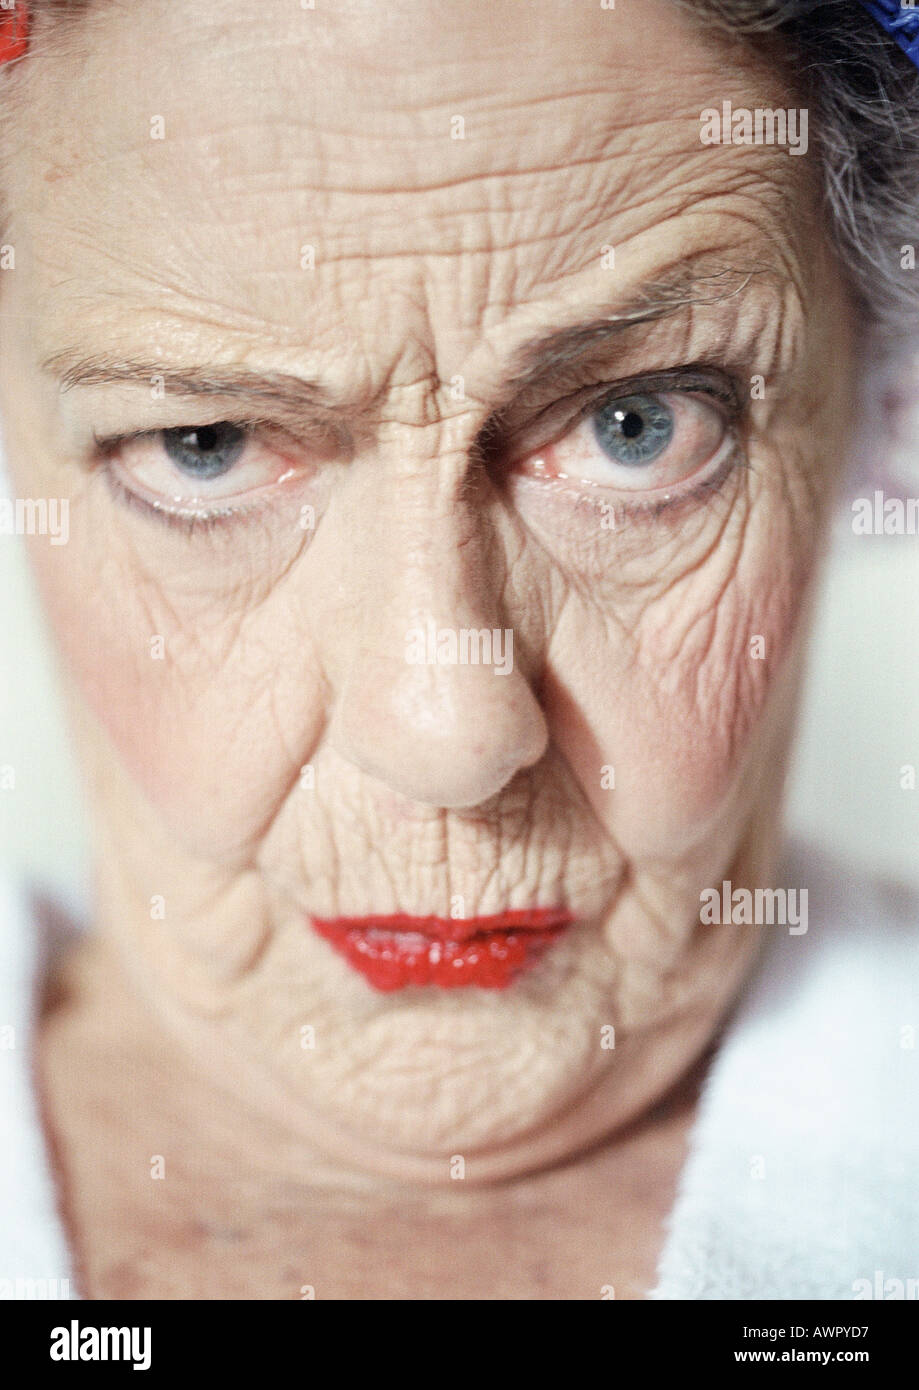 Elderly woman raising eyebrow and looking at camera, portrait, close-up Stock Photo